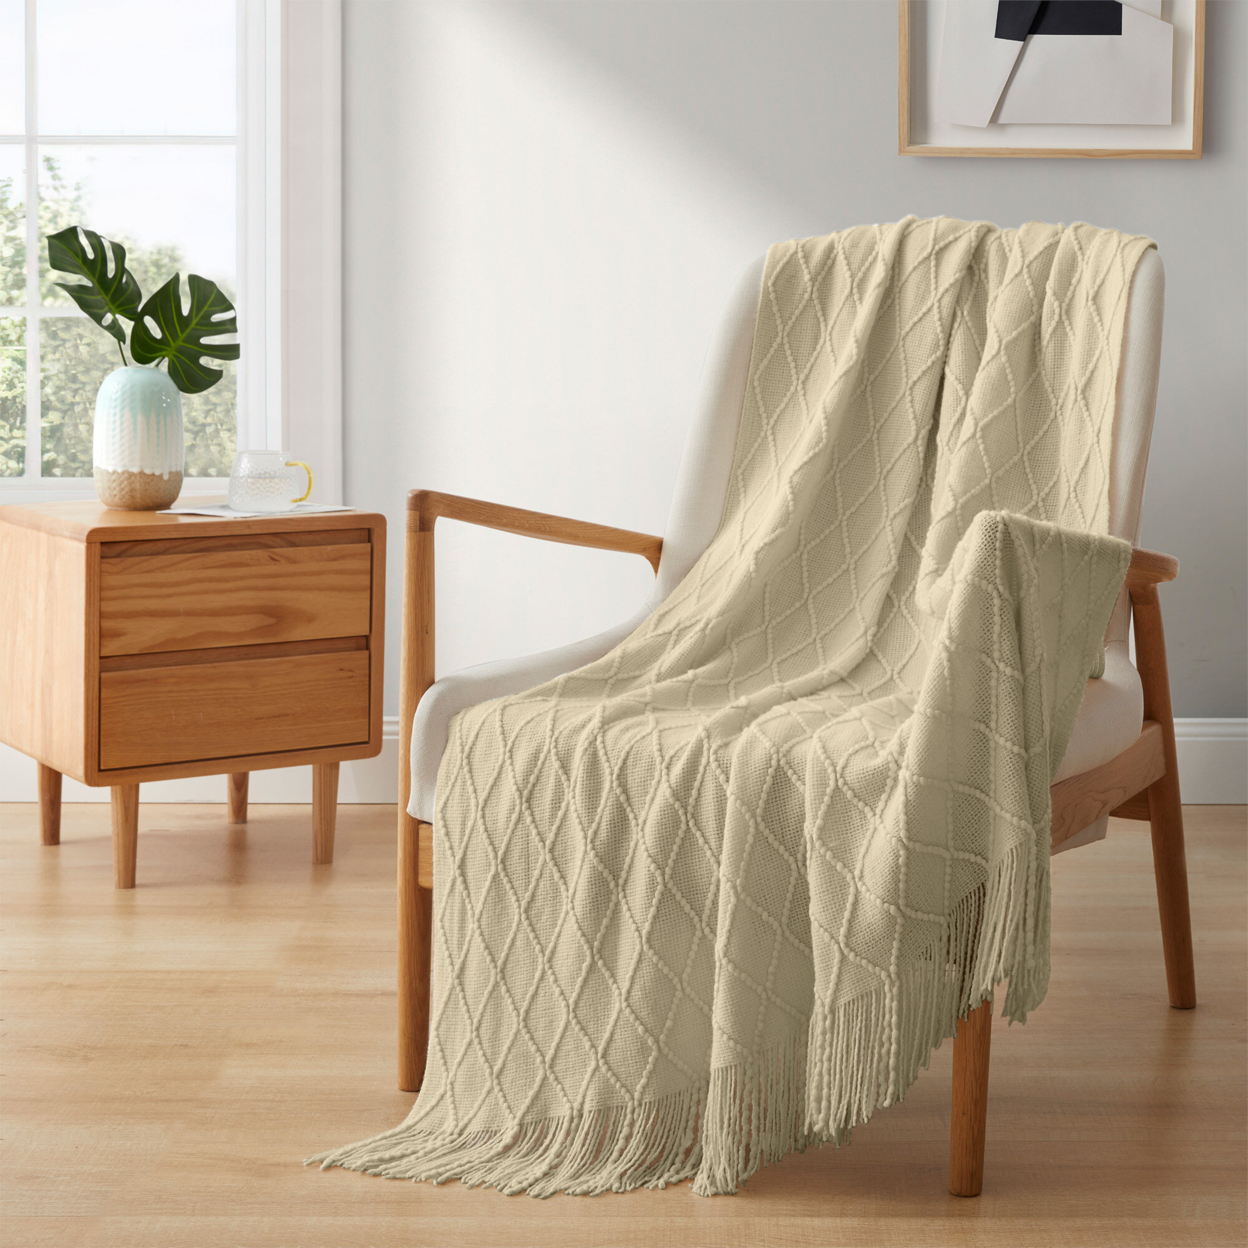 Ultra Soft Diamond Knit Throw Blanket 50x60-Perfect For Year-round Comfort - Ivory, 50 In X 60 In